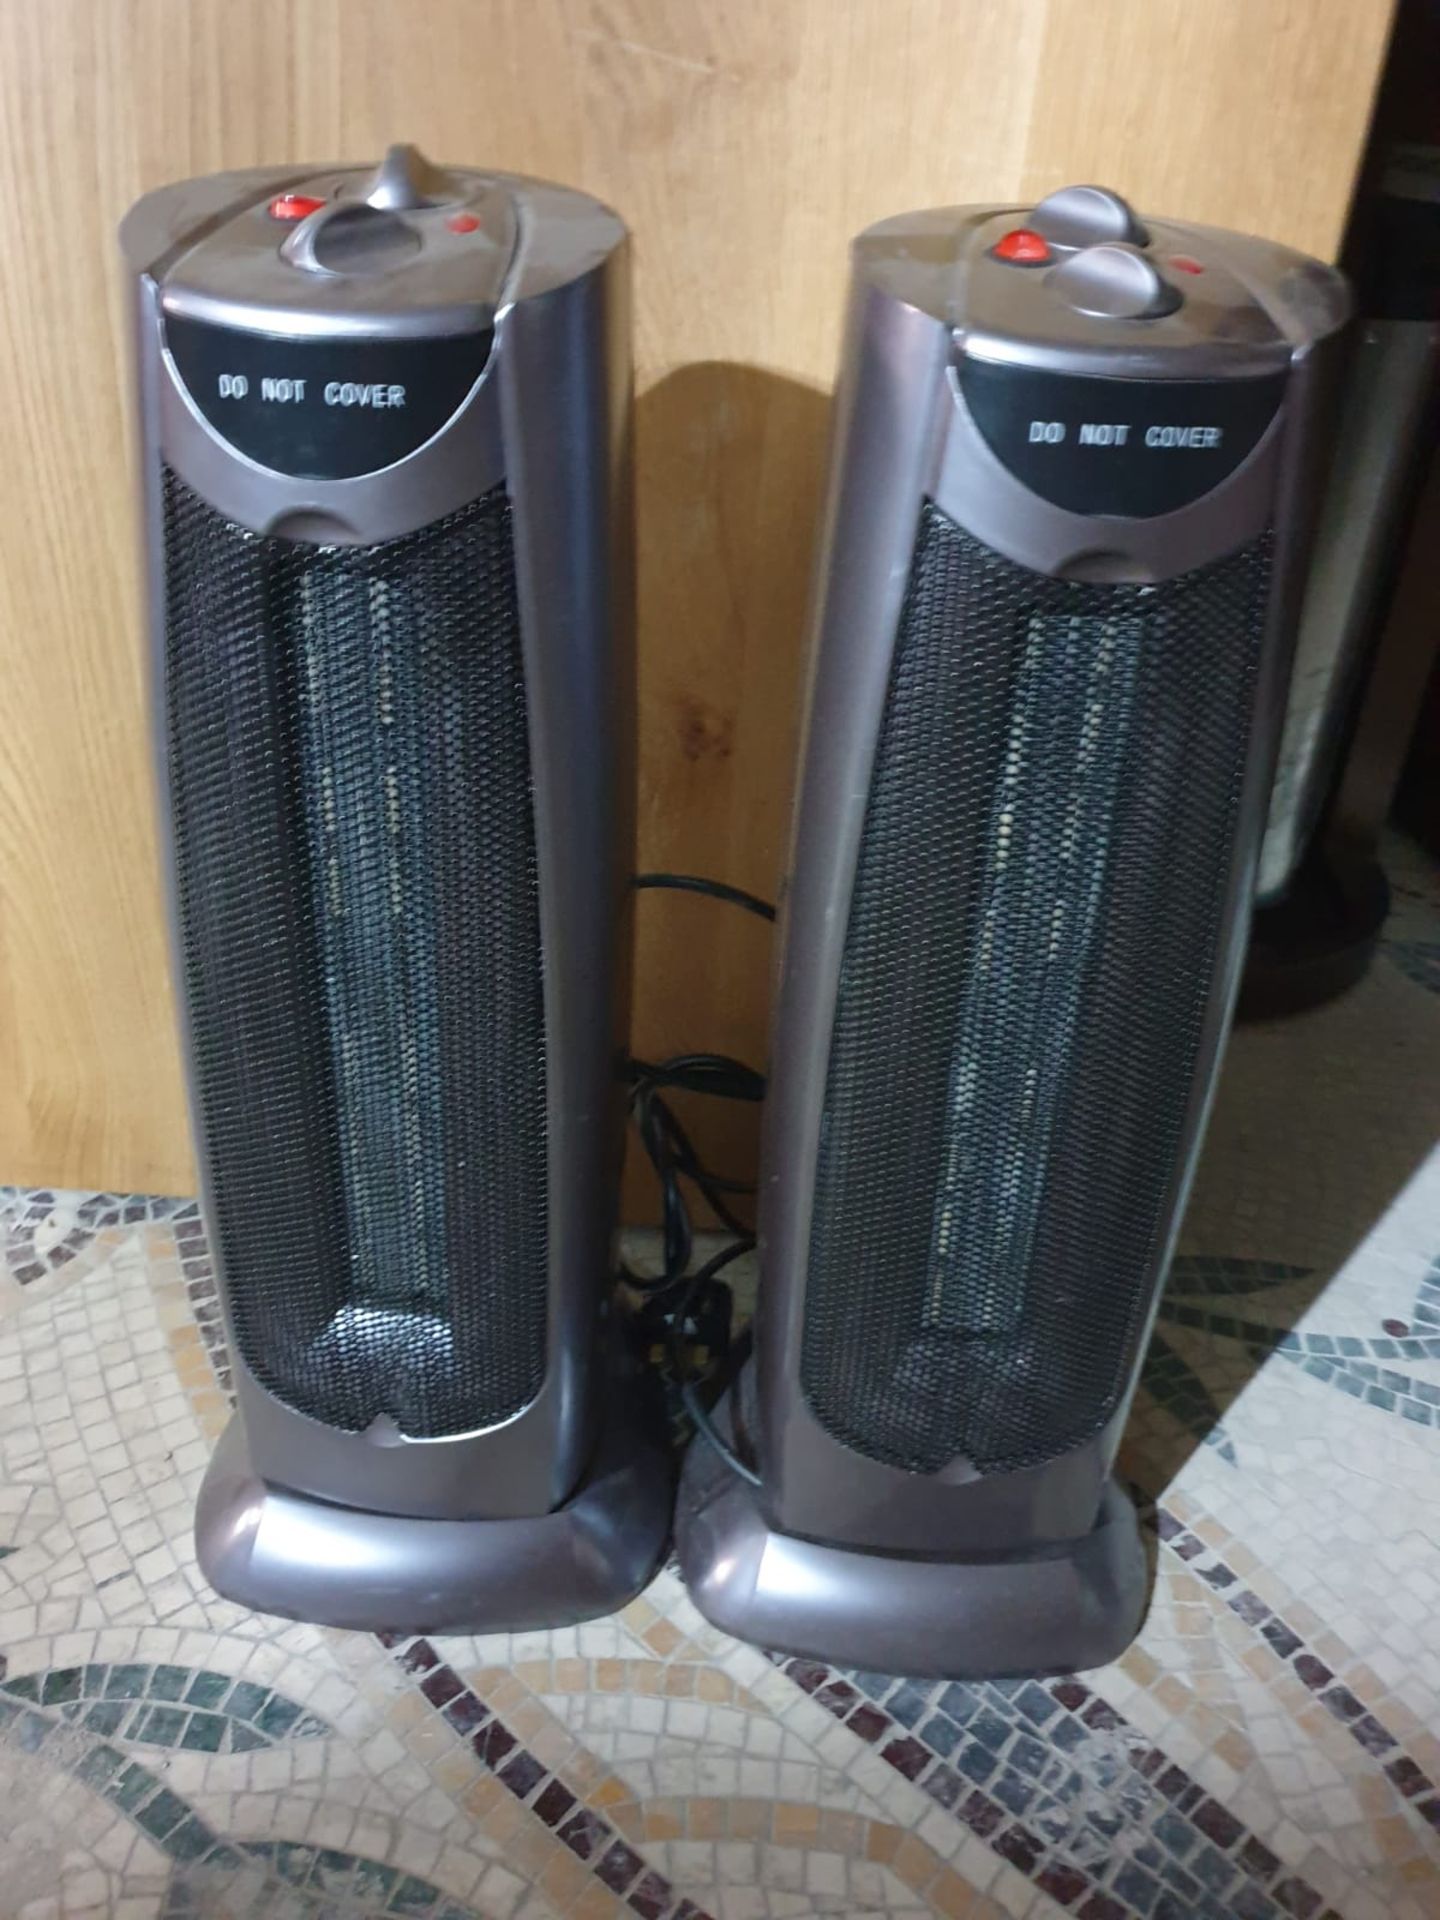 2 x Fan Heater With Overheat Protection - 2kW Tower fan heater with wide angle oscillation, two heat